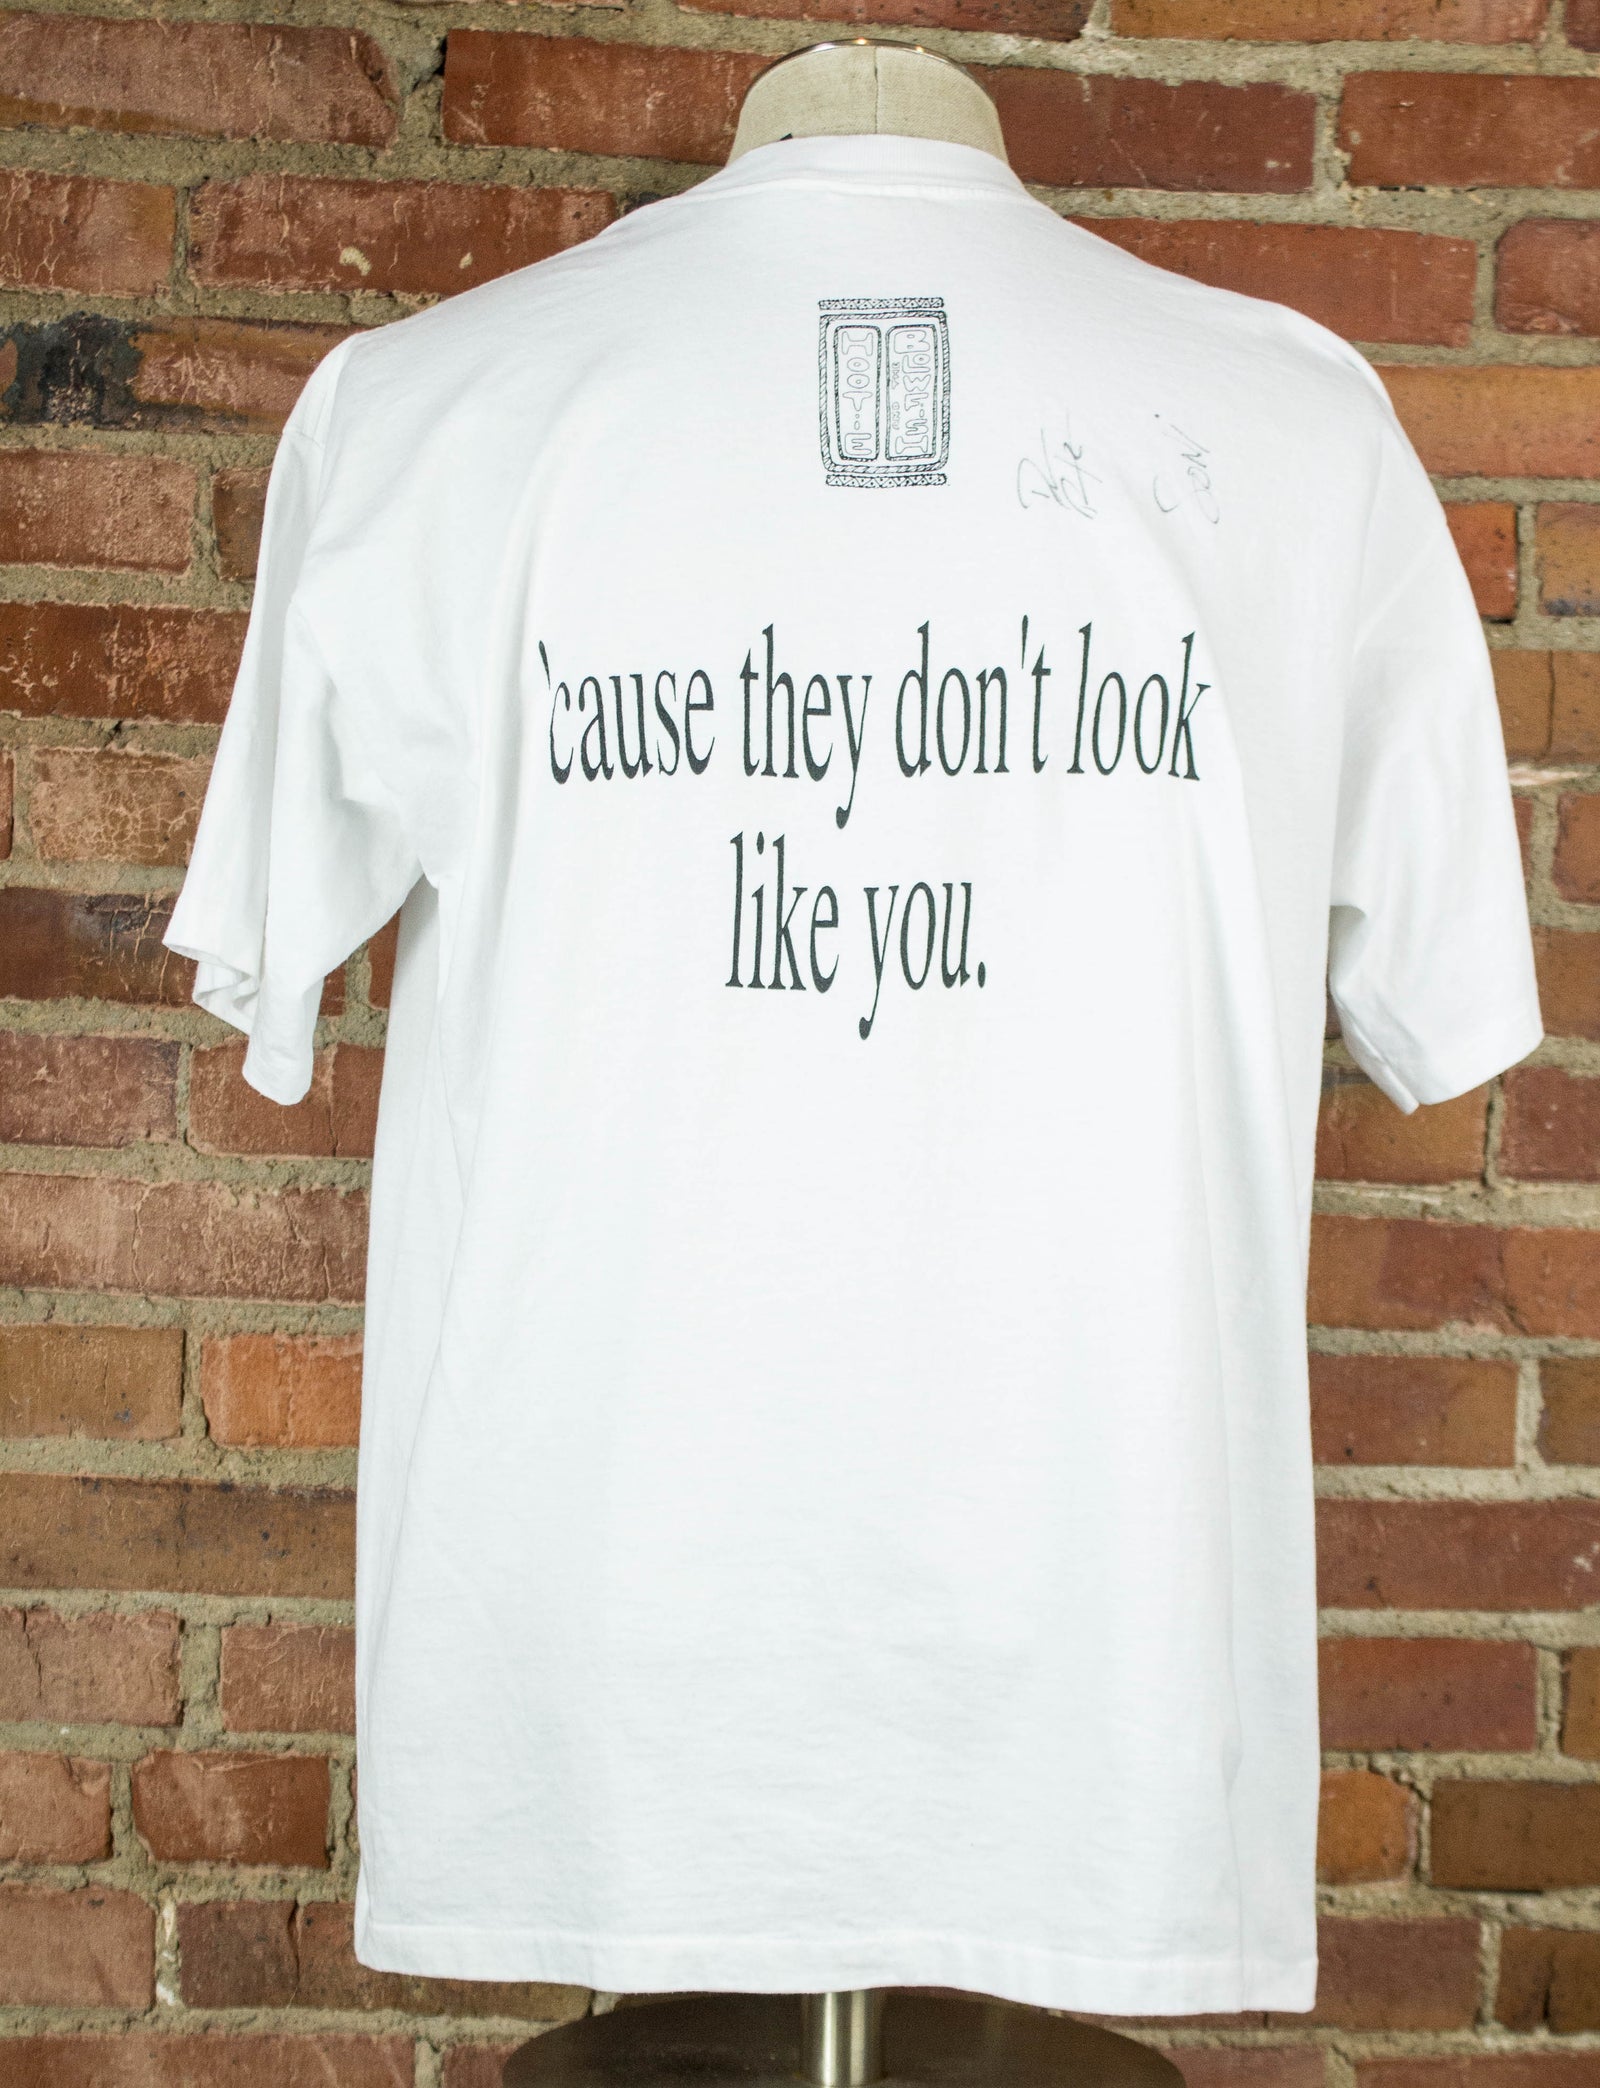 Vintage 90's Hootie And The Blowfish 'Cause They Don't Look Like You Concert T Shirt Unisex XL